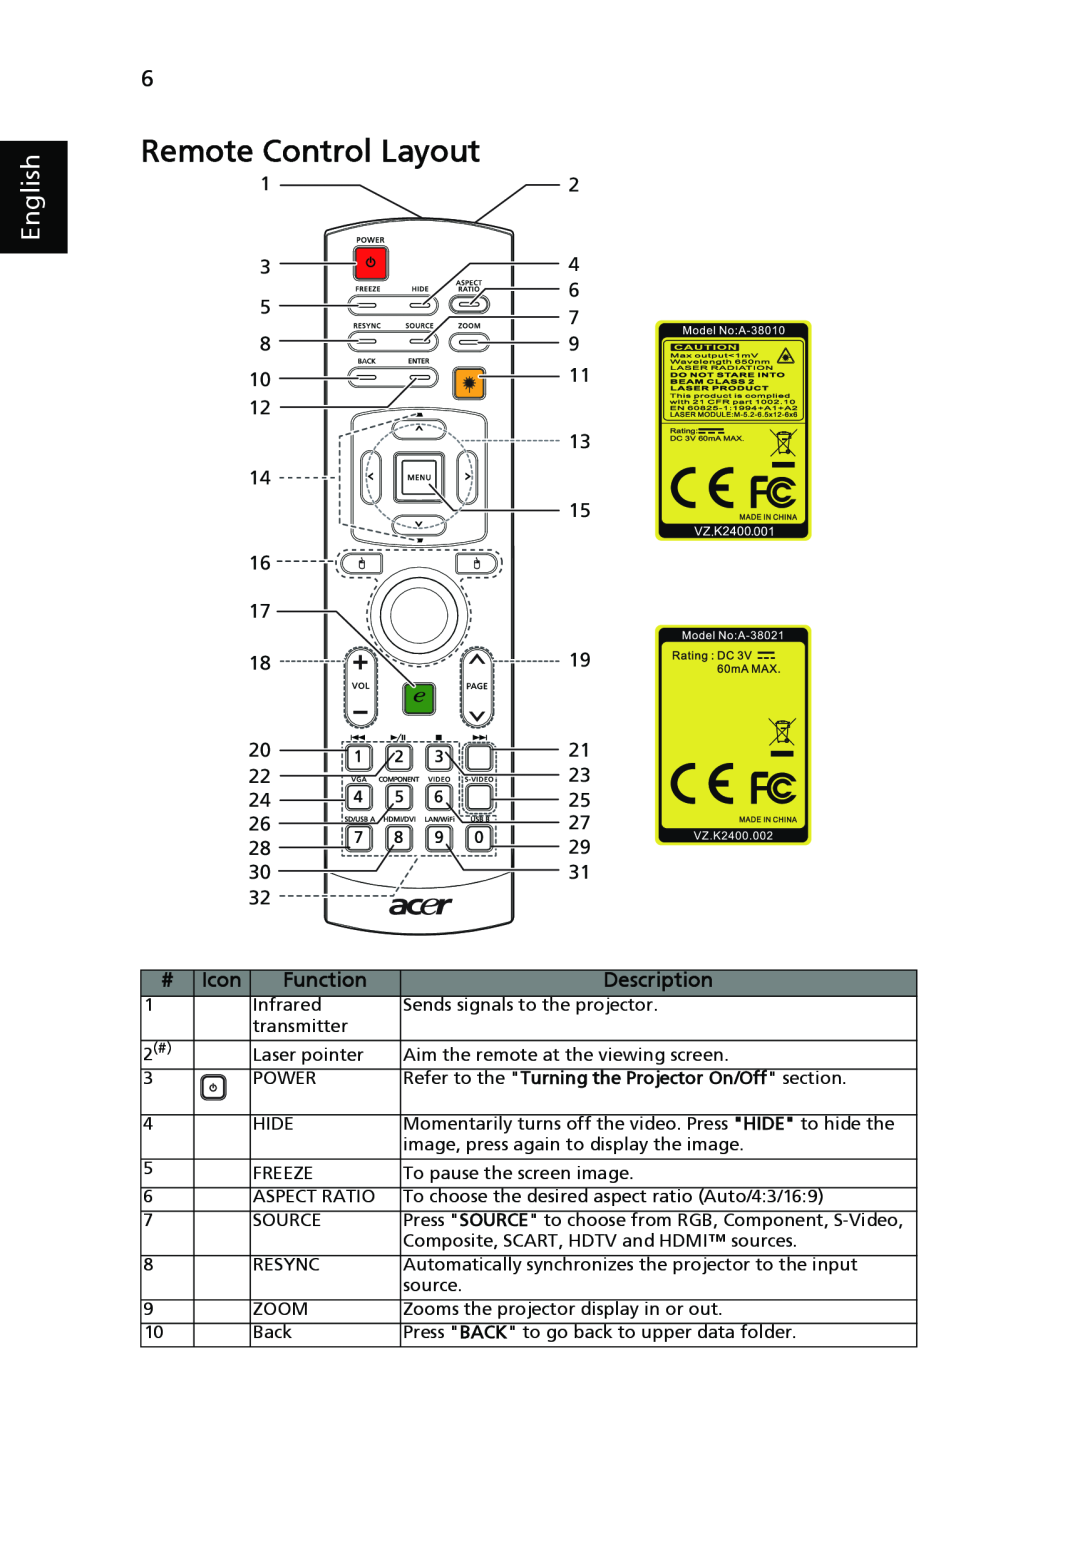 Acer P7205, P7200i, P7203 manual Remote Control Layout, English, Icon 